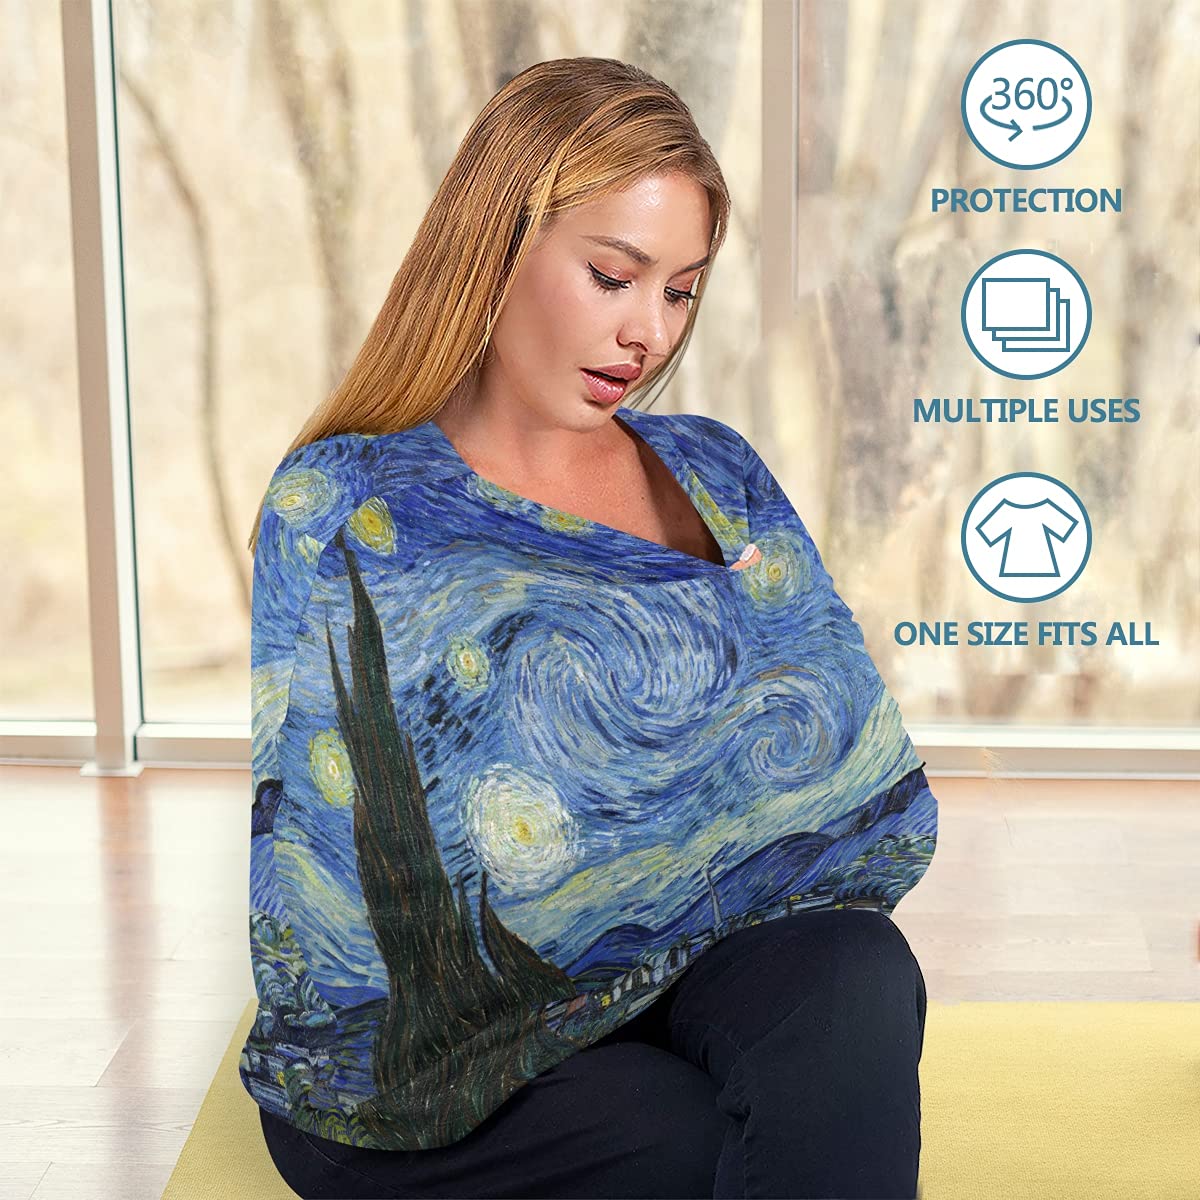 Van Gogh Starry Night Pattern Nursing Cover Breastfeeding Scarf, Stretchy Infant Carseat Canopy Multi-use Stroller Cover Car Seat Cover for Baby Girl Boy